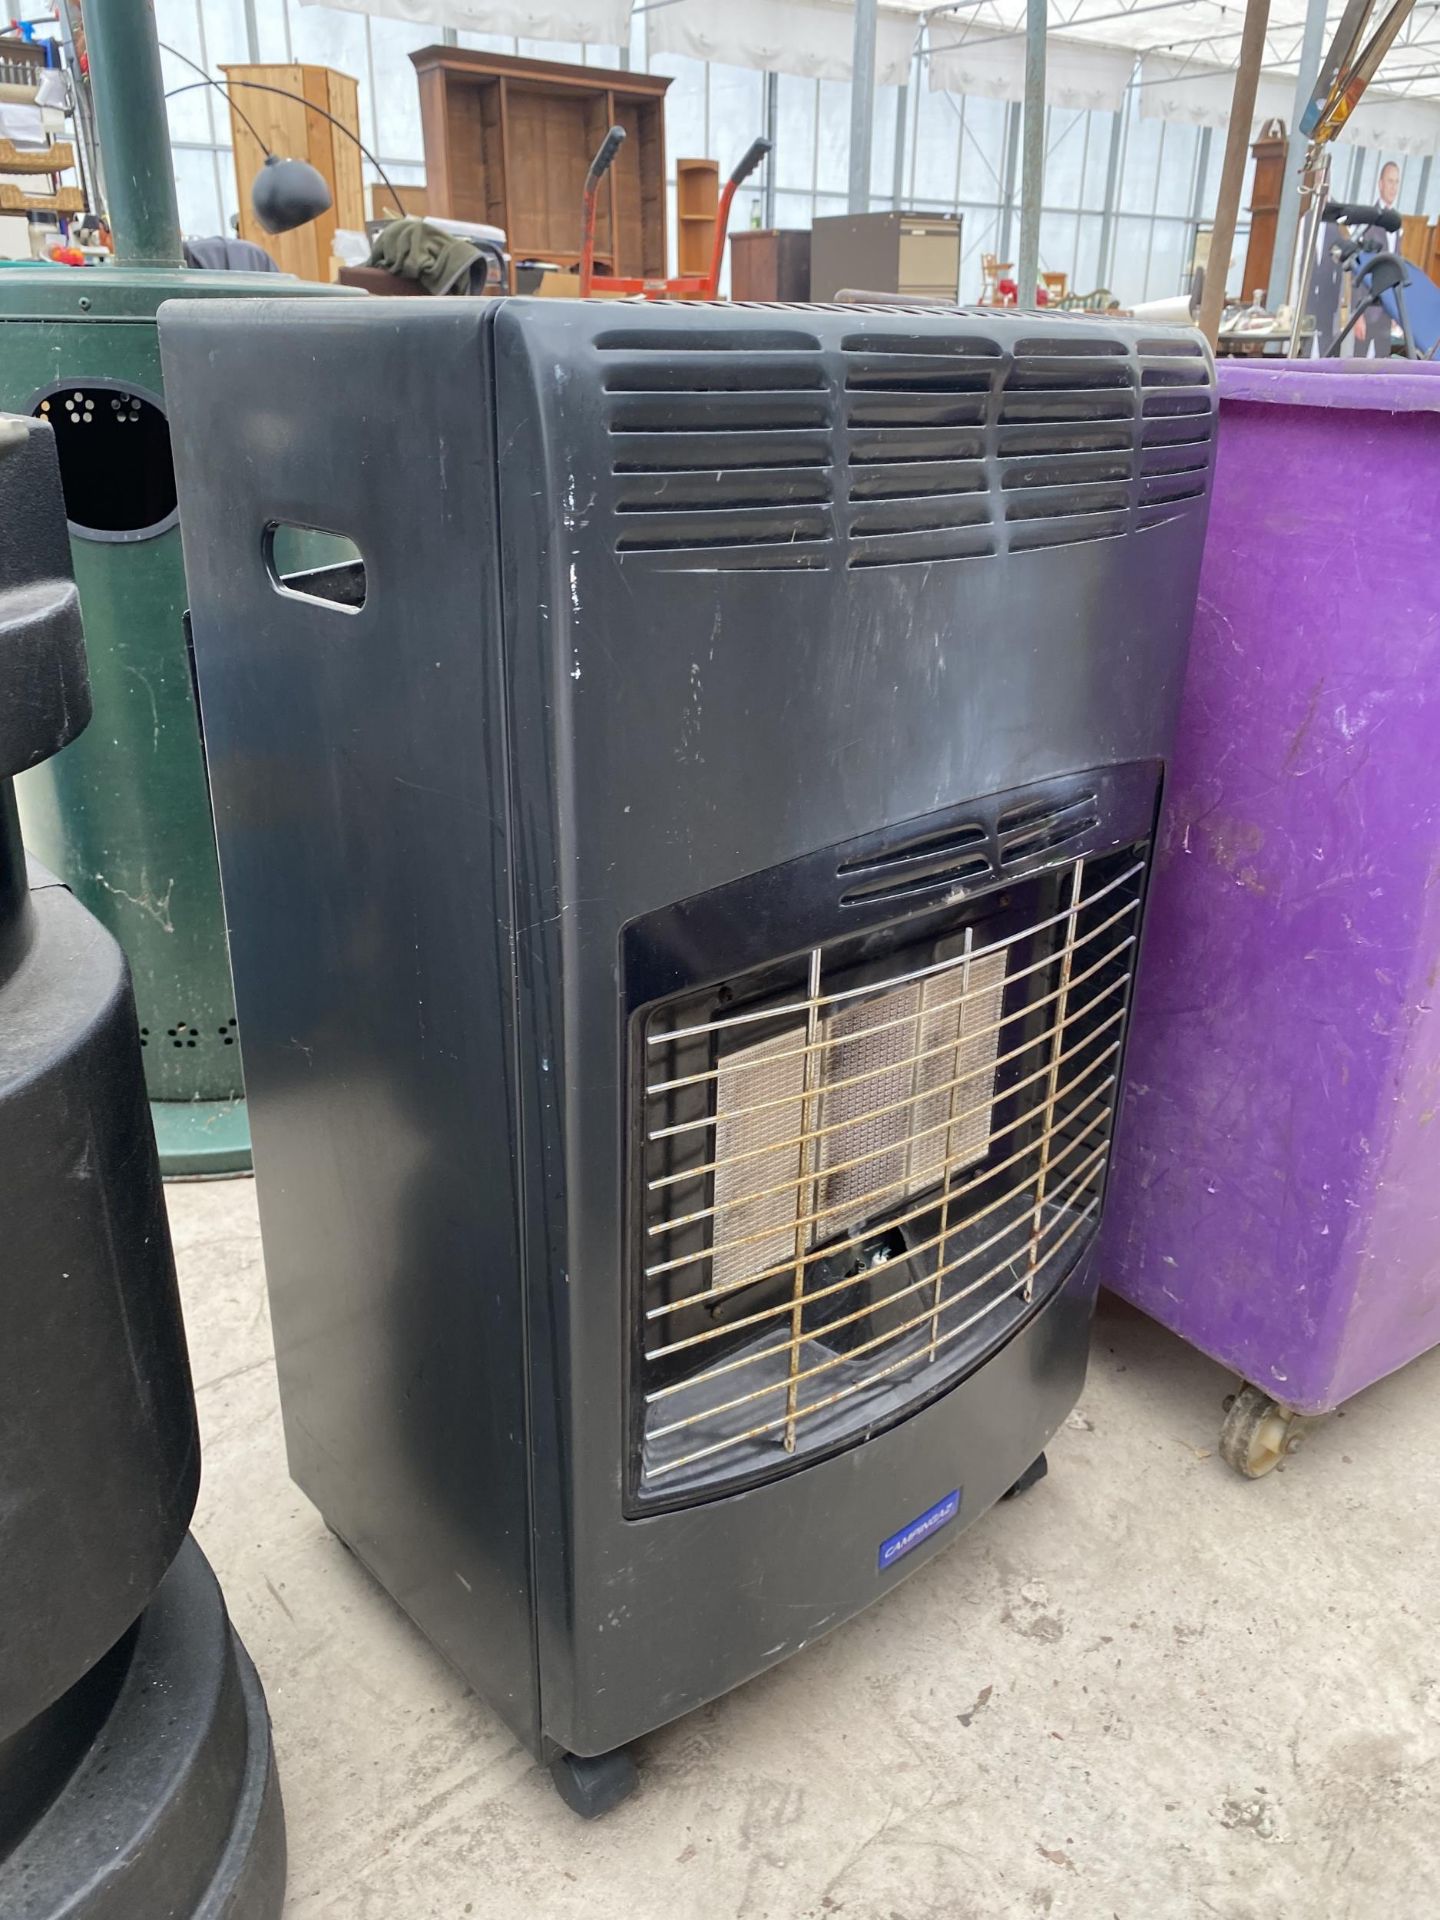 A CAMPINGAZ GAS HEATER - Image 2 of 3